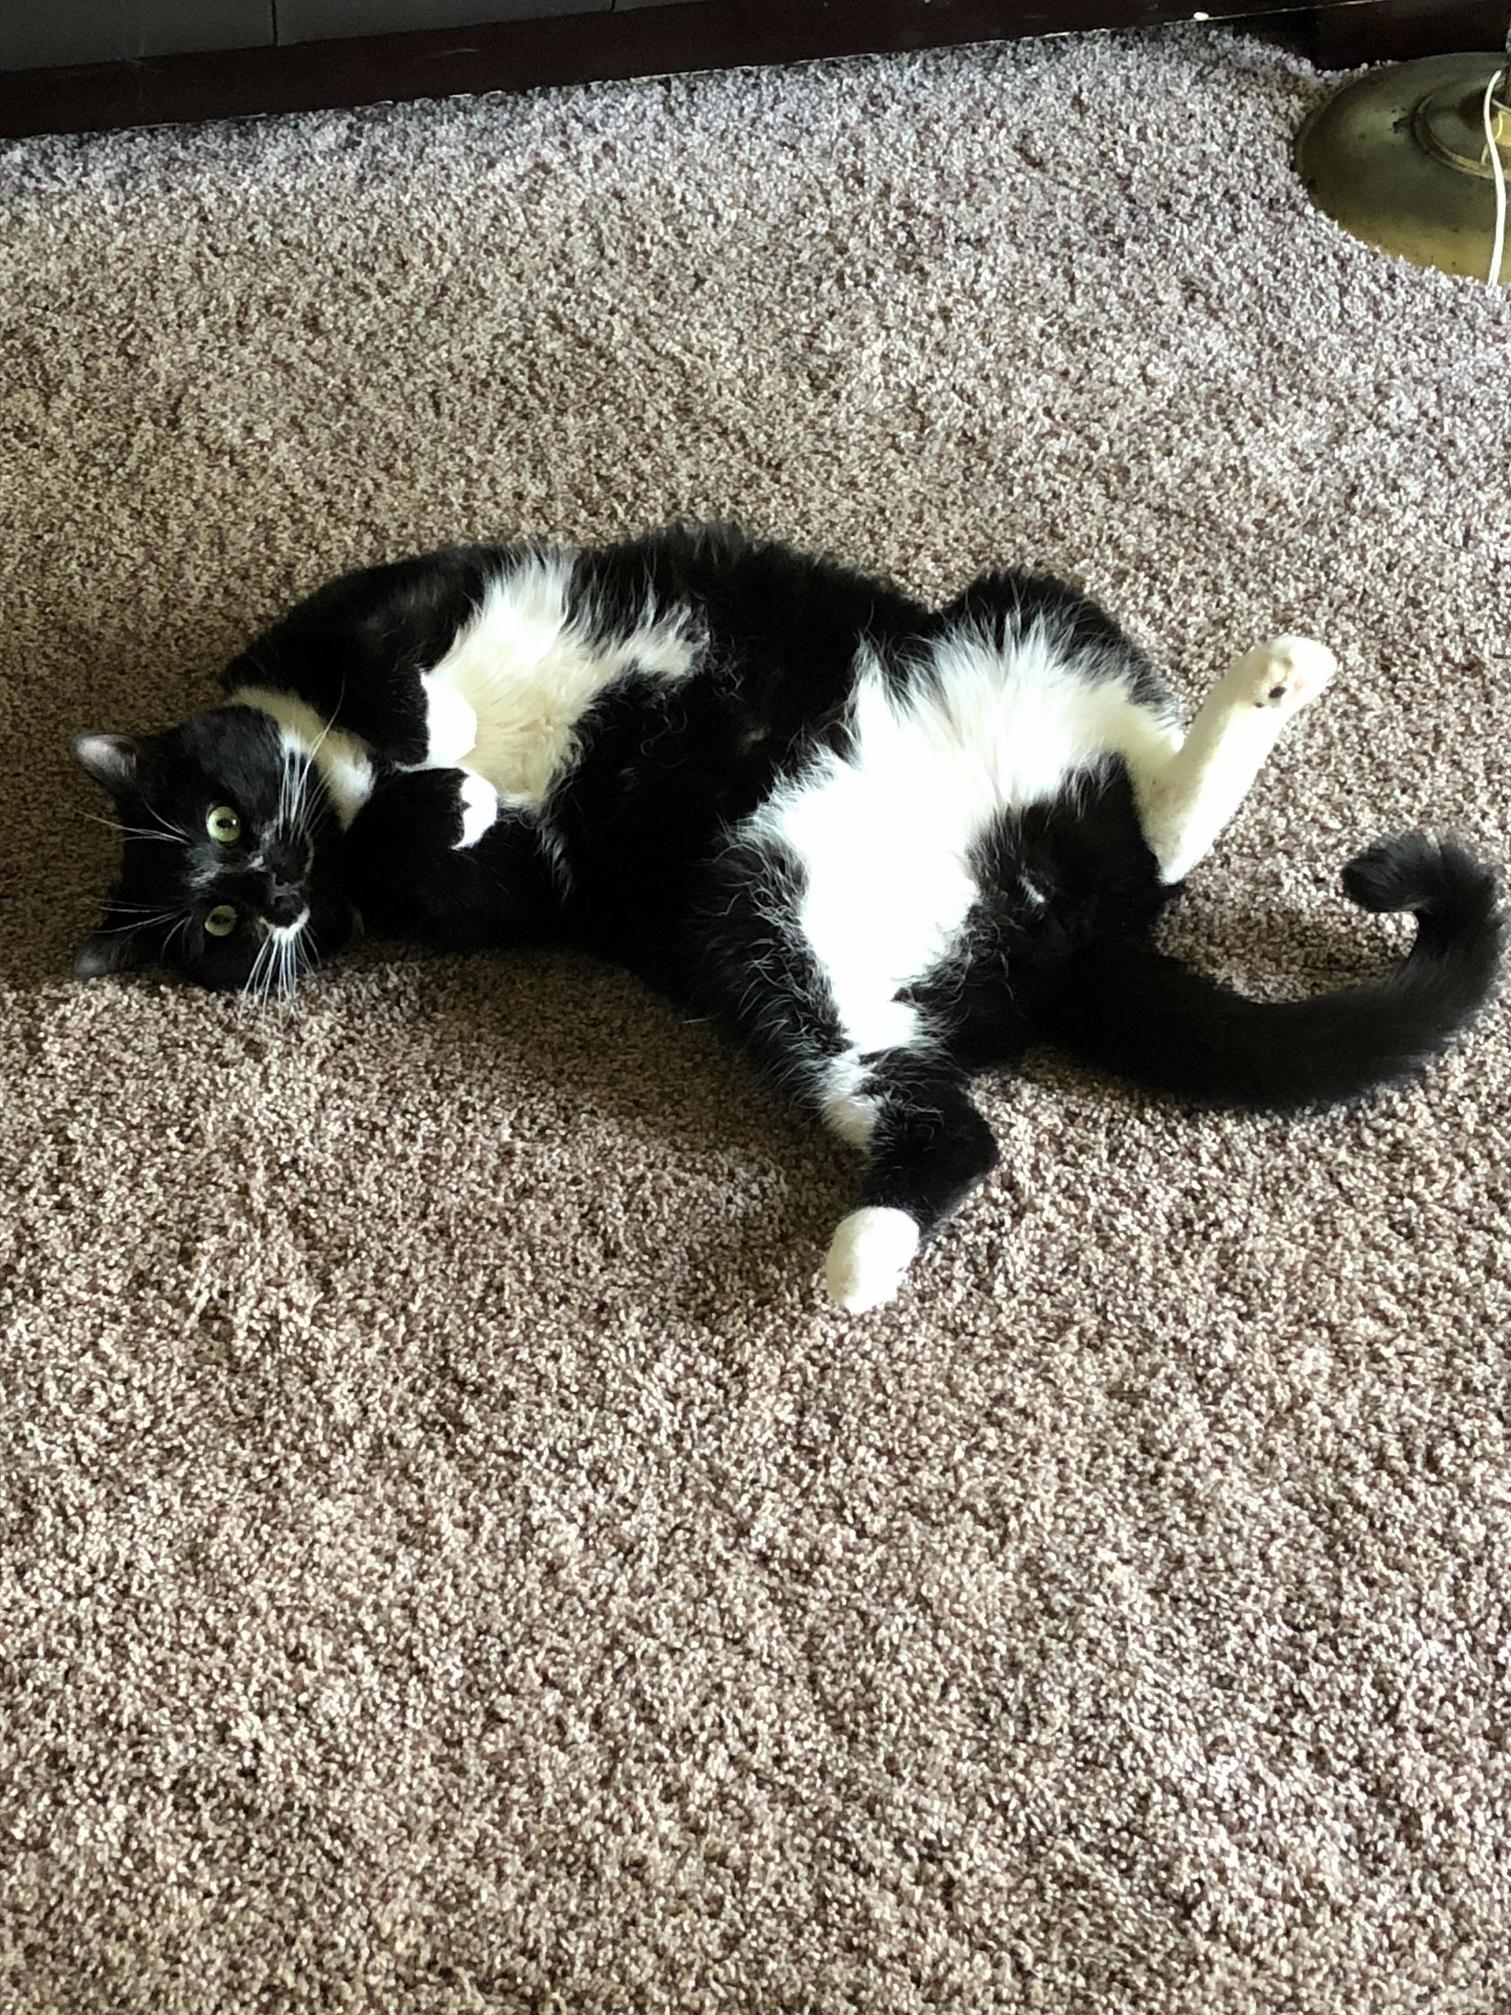 Warning catnip may cause cat.exe to crash for an unexpected amount of time. always administer with caution.